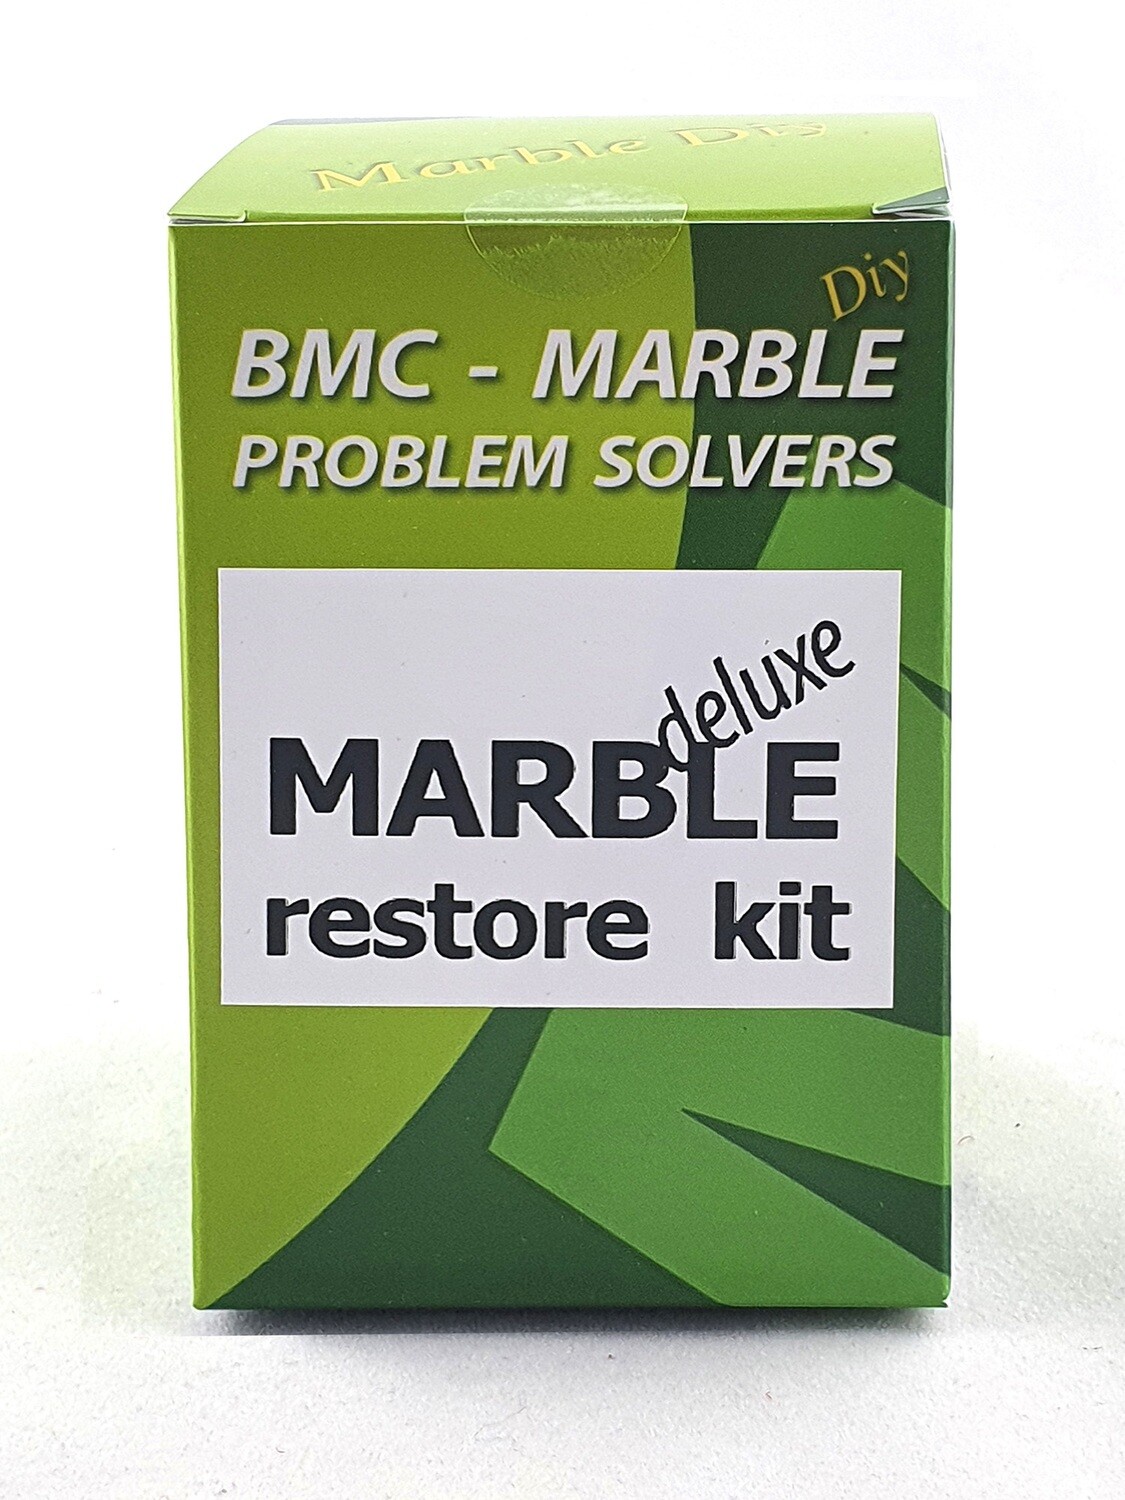 Marble Restore kit DELUXE for polishing marble, travertine and limestone